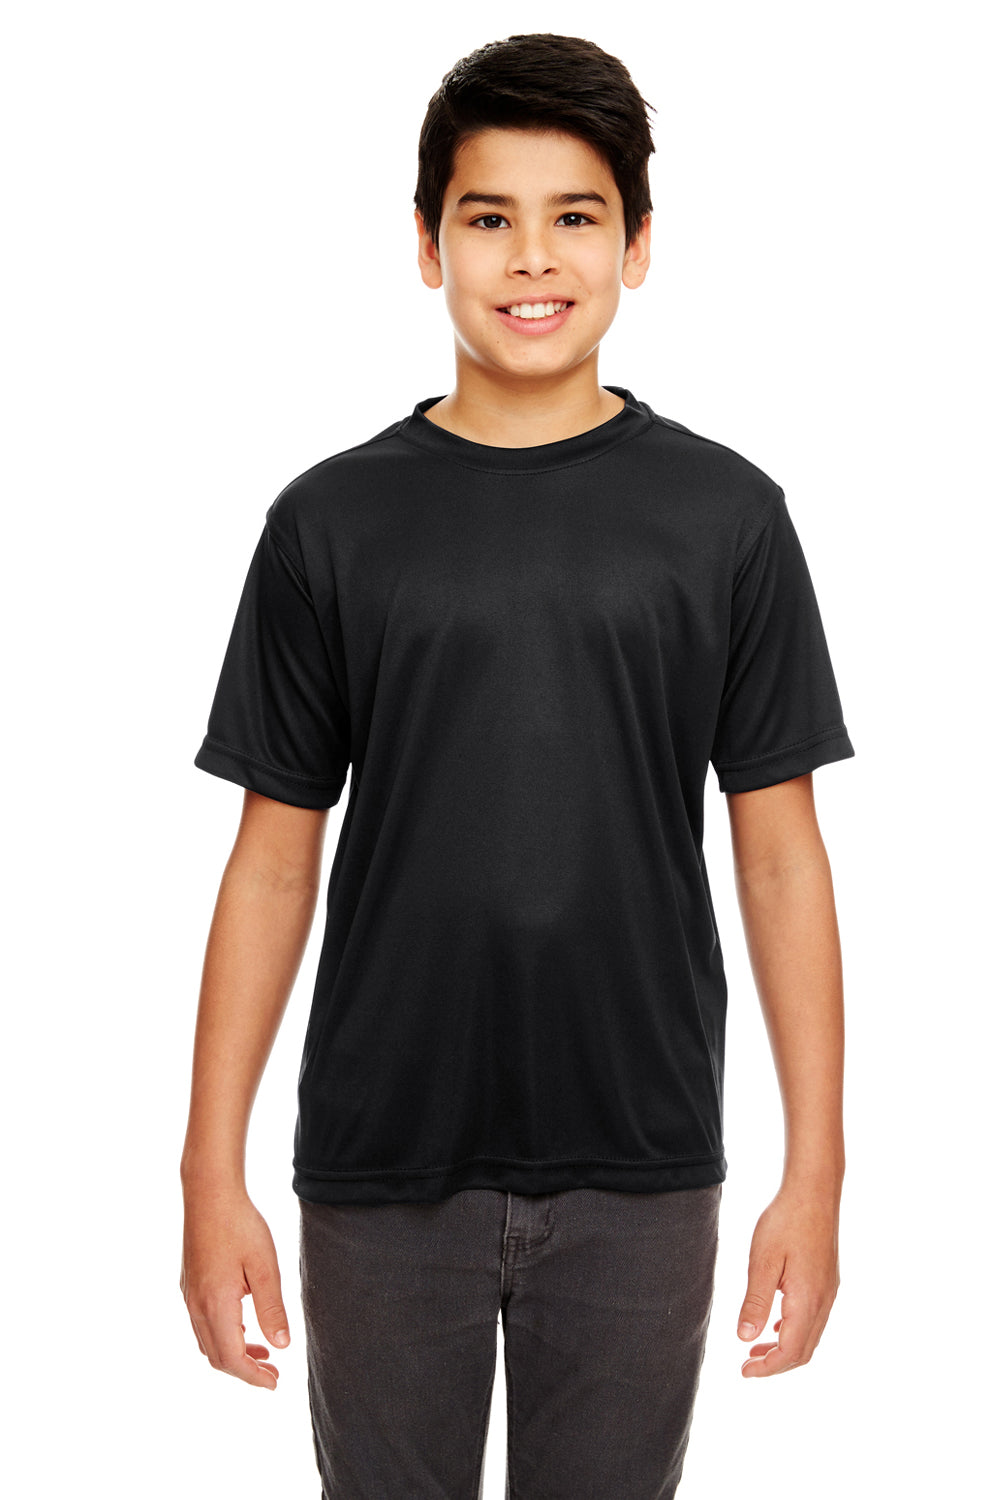 UltraClub 8620Y Youth Cool & Dry Performance Moisture Wicking Short Sleeve Crewneck T-Shirt Black Front